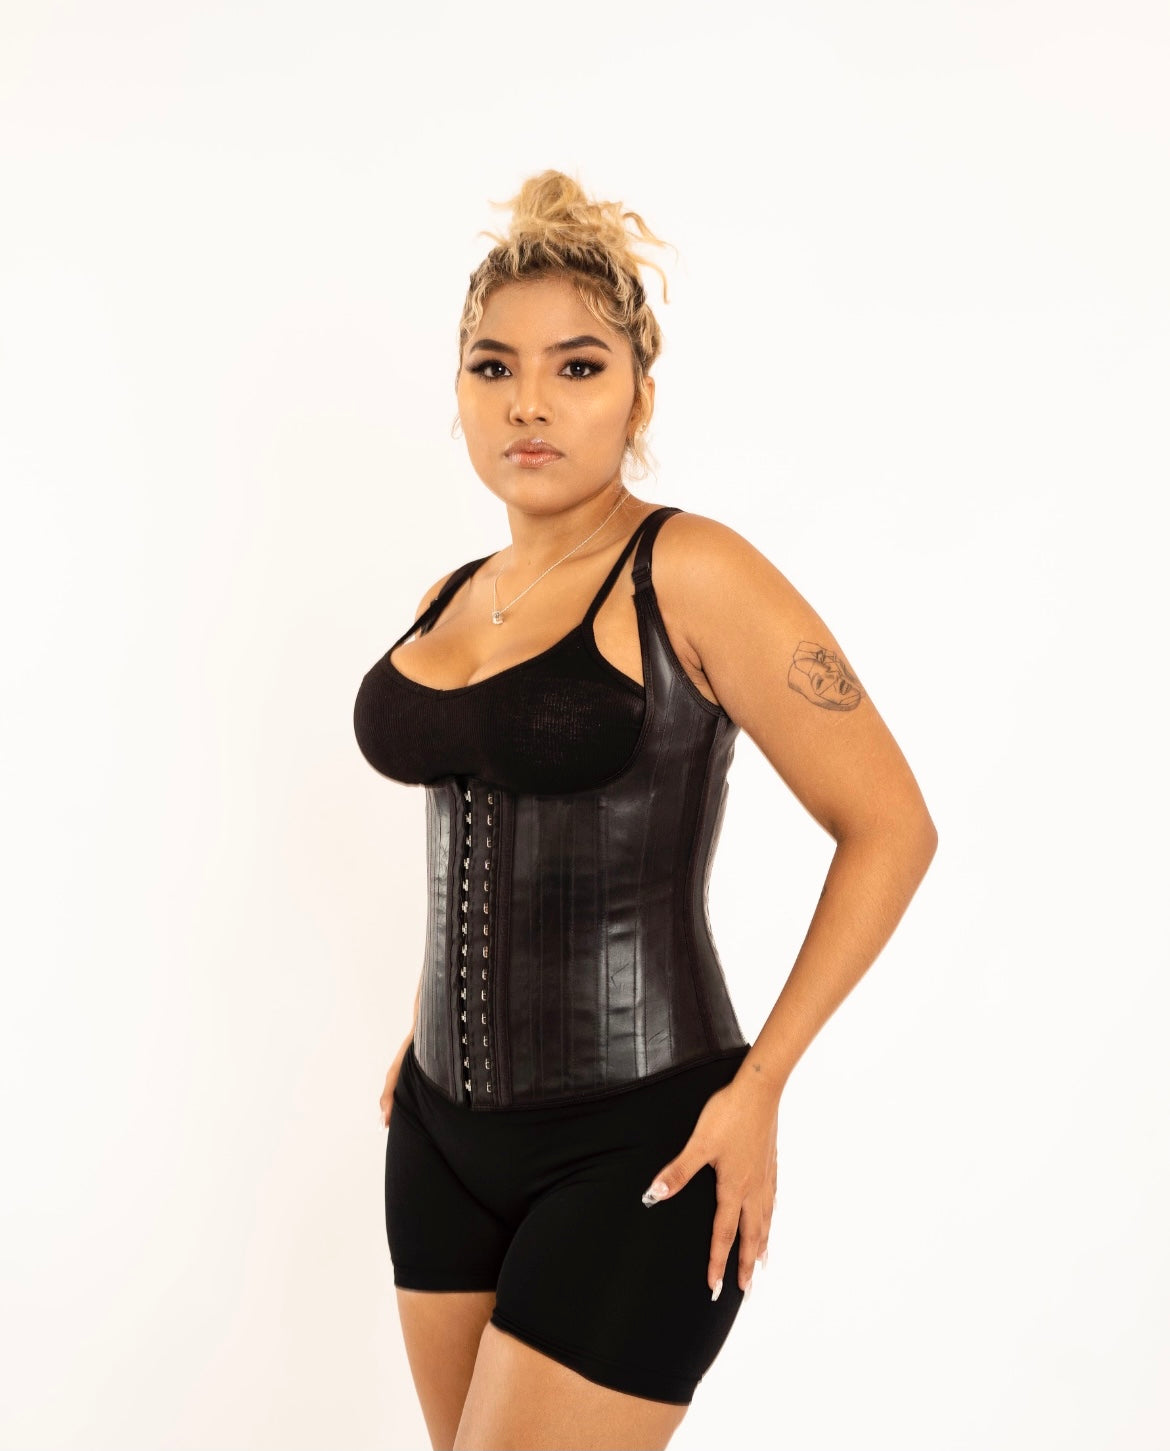 Squeez Me Skinny Waist Trainers - I TOLD YOU ALL” 3X XS smallest